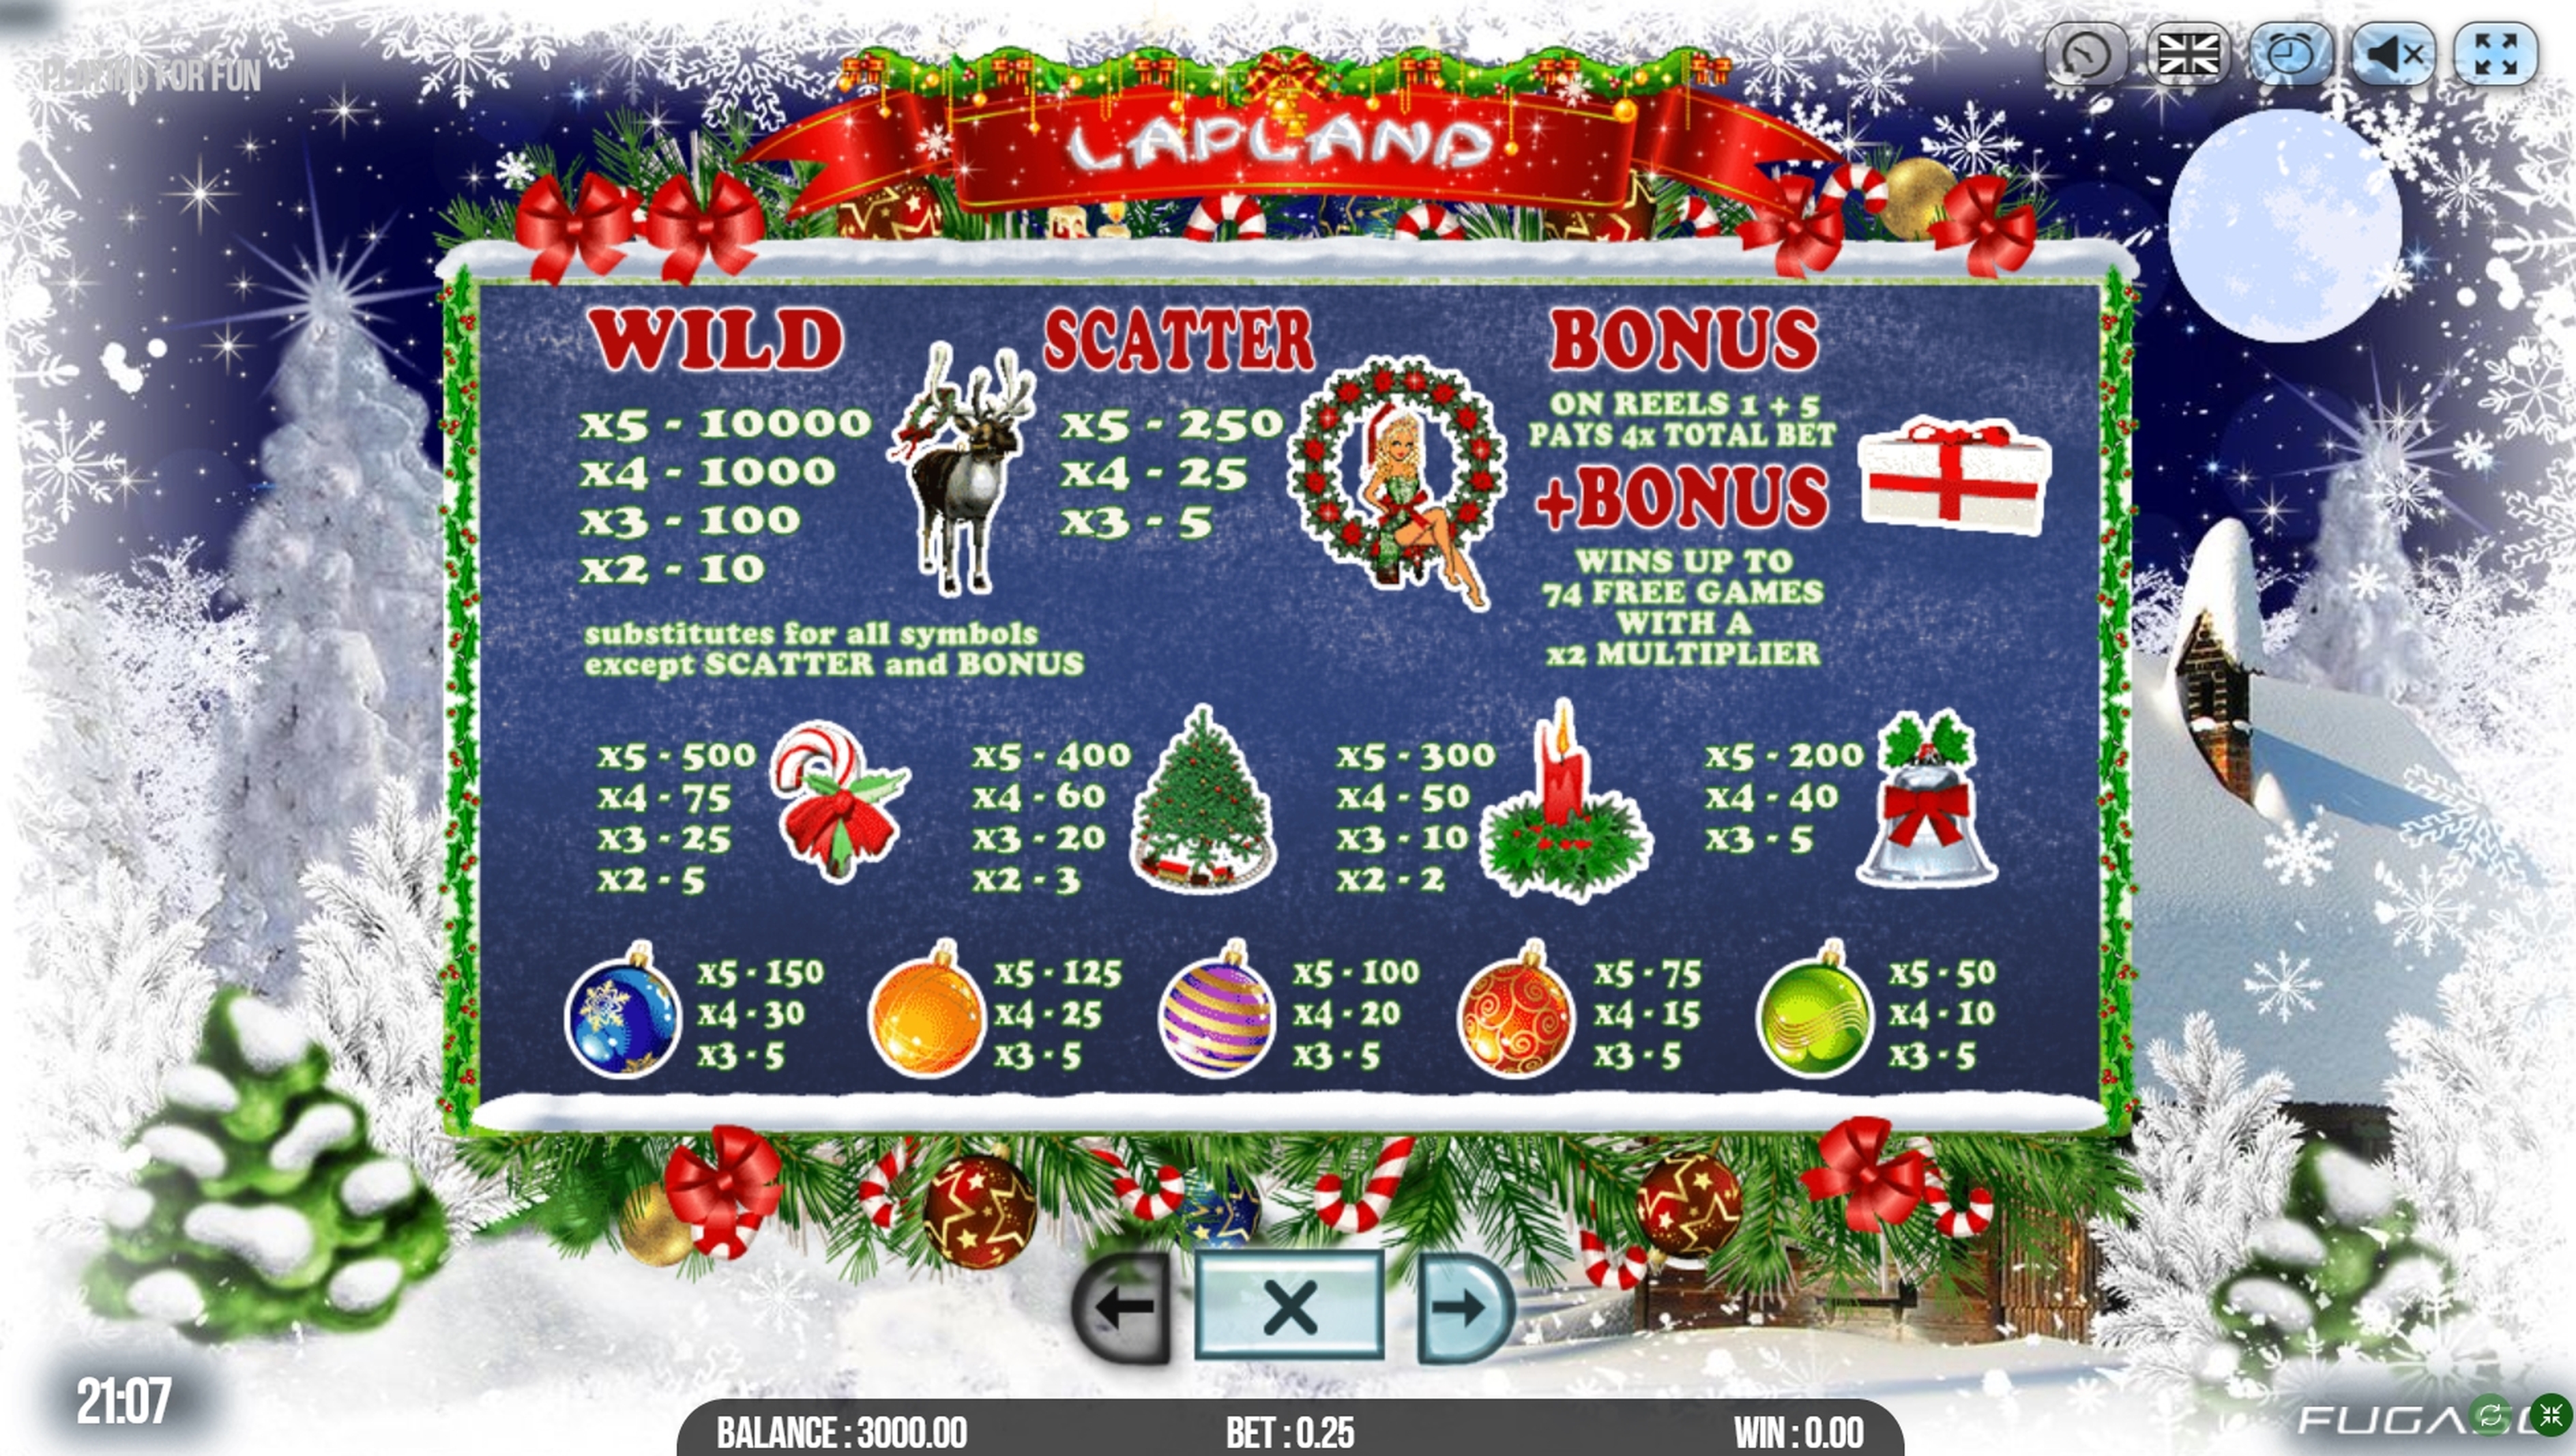 Info of Lapland Slot Game by Fugaso